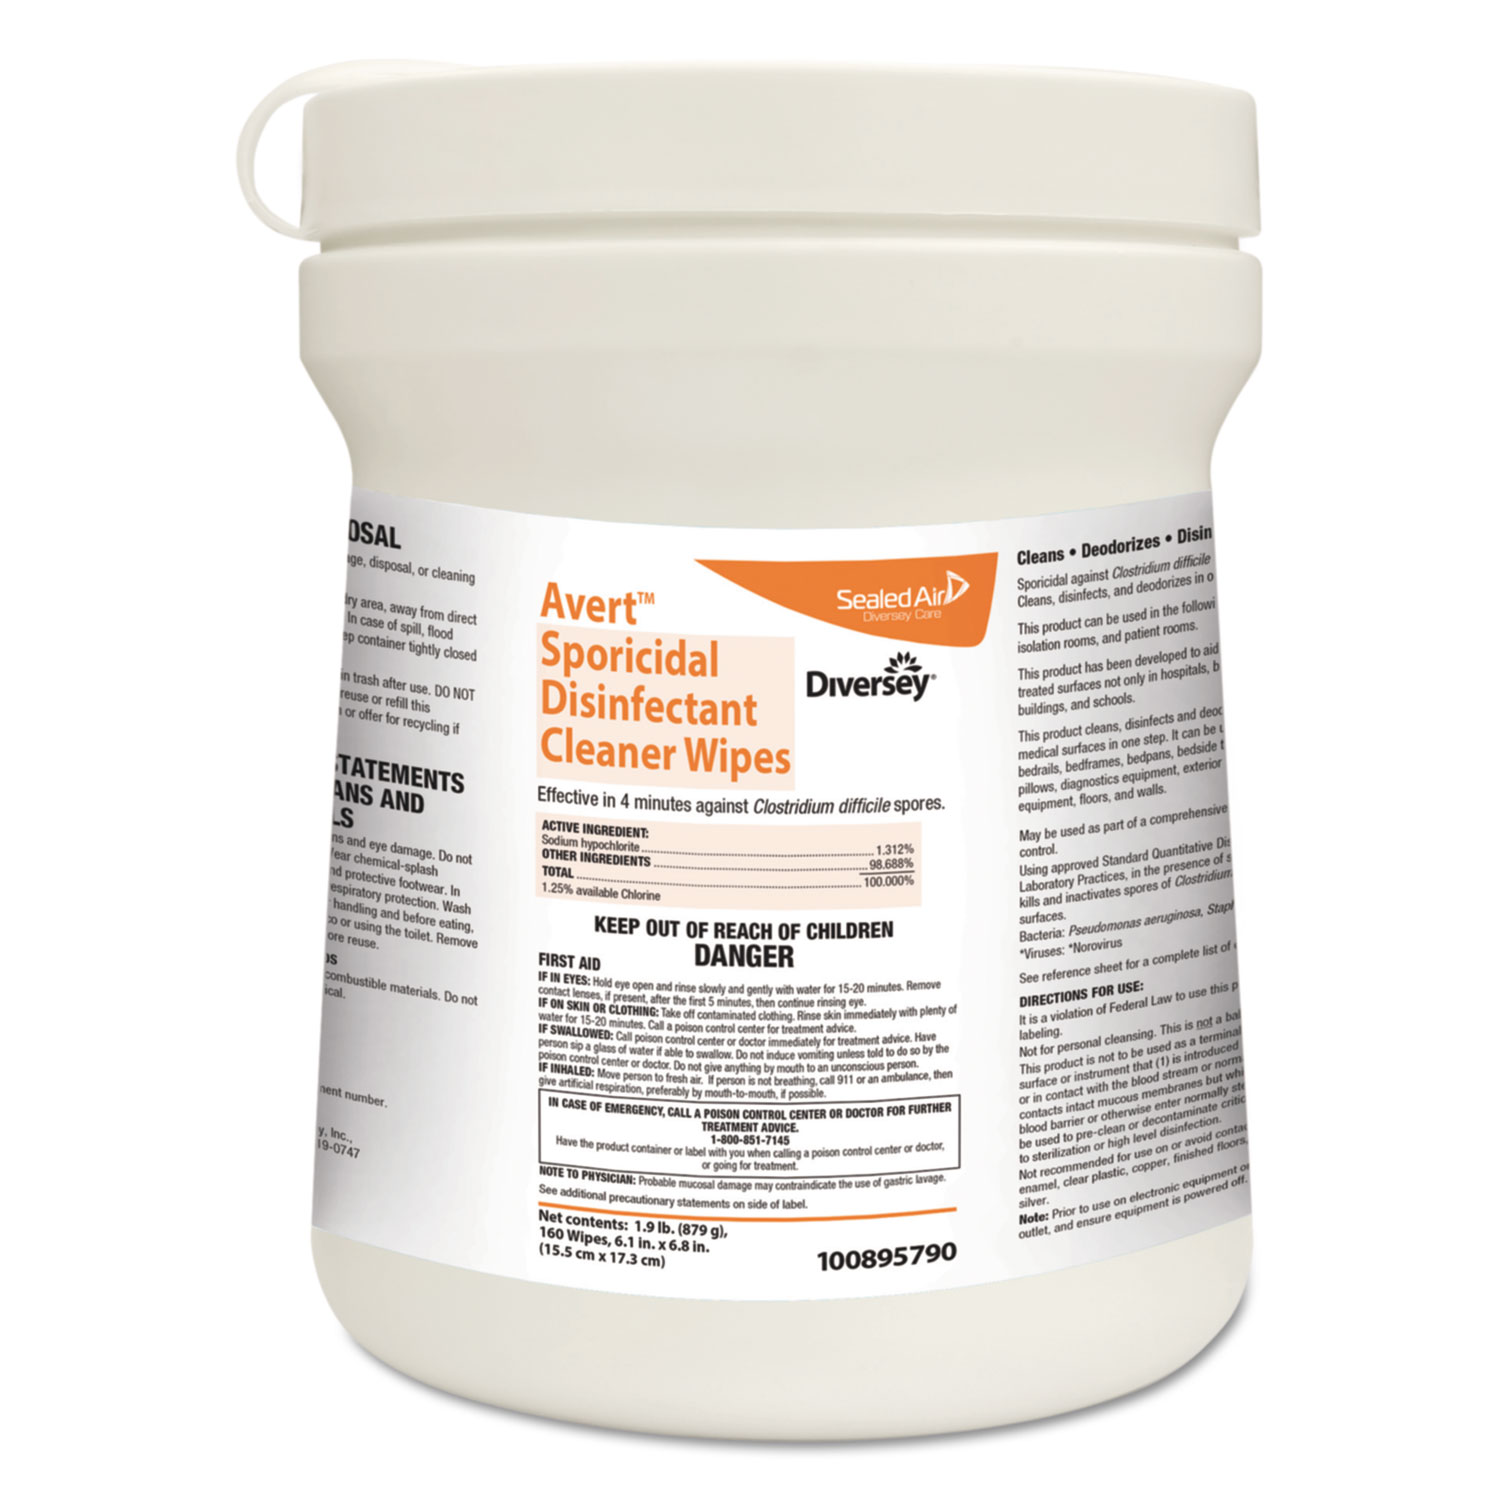 Avert Sporicidal Disinfectant Cleaner Wipes, Chlorine, 6 x 7, 160/Can